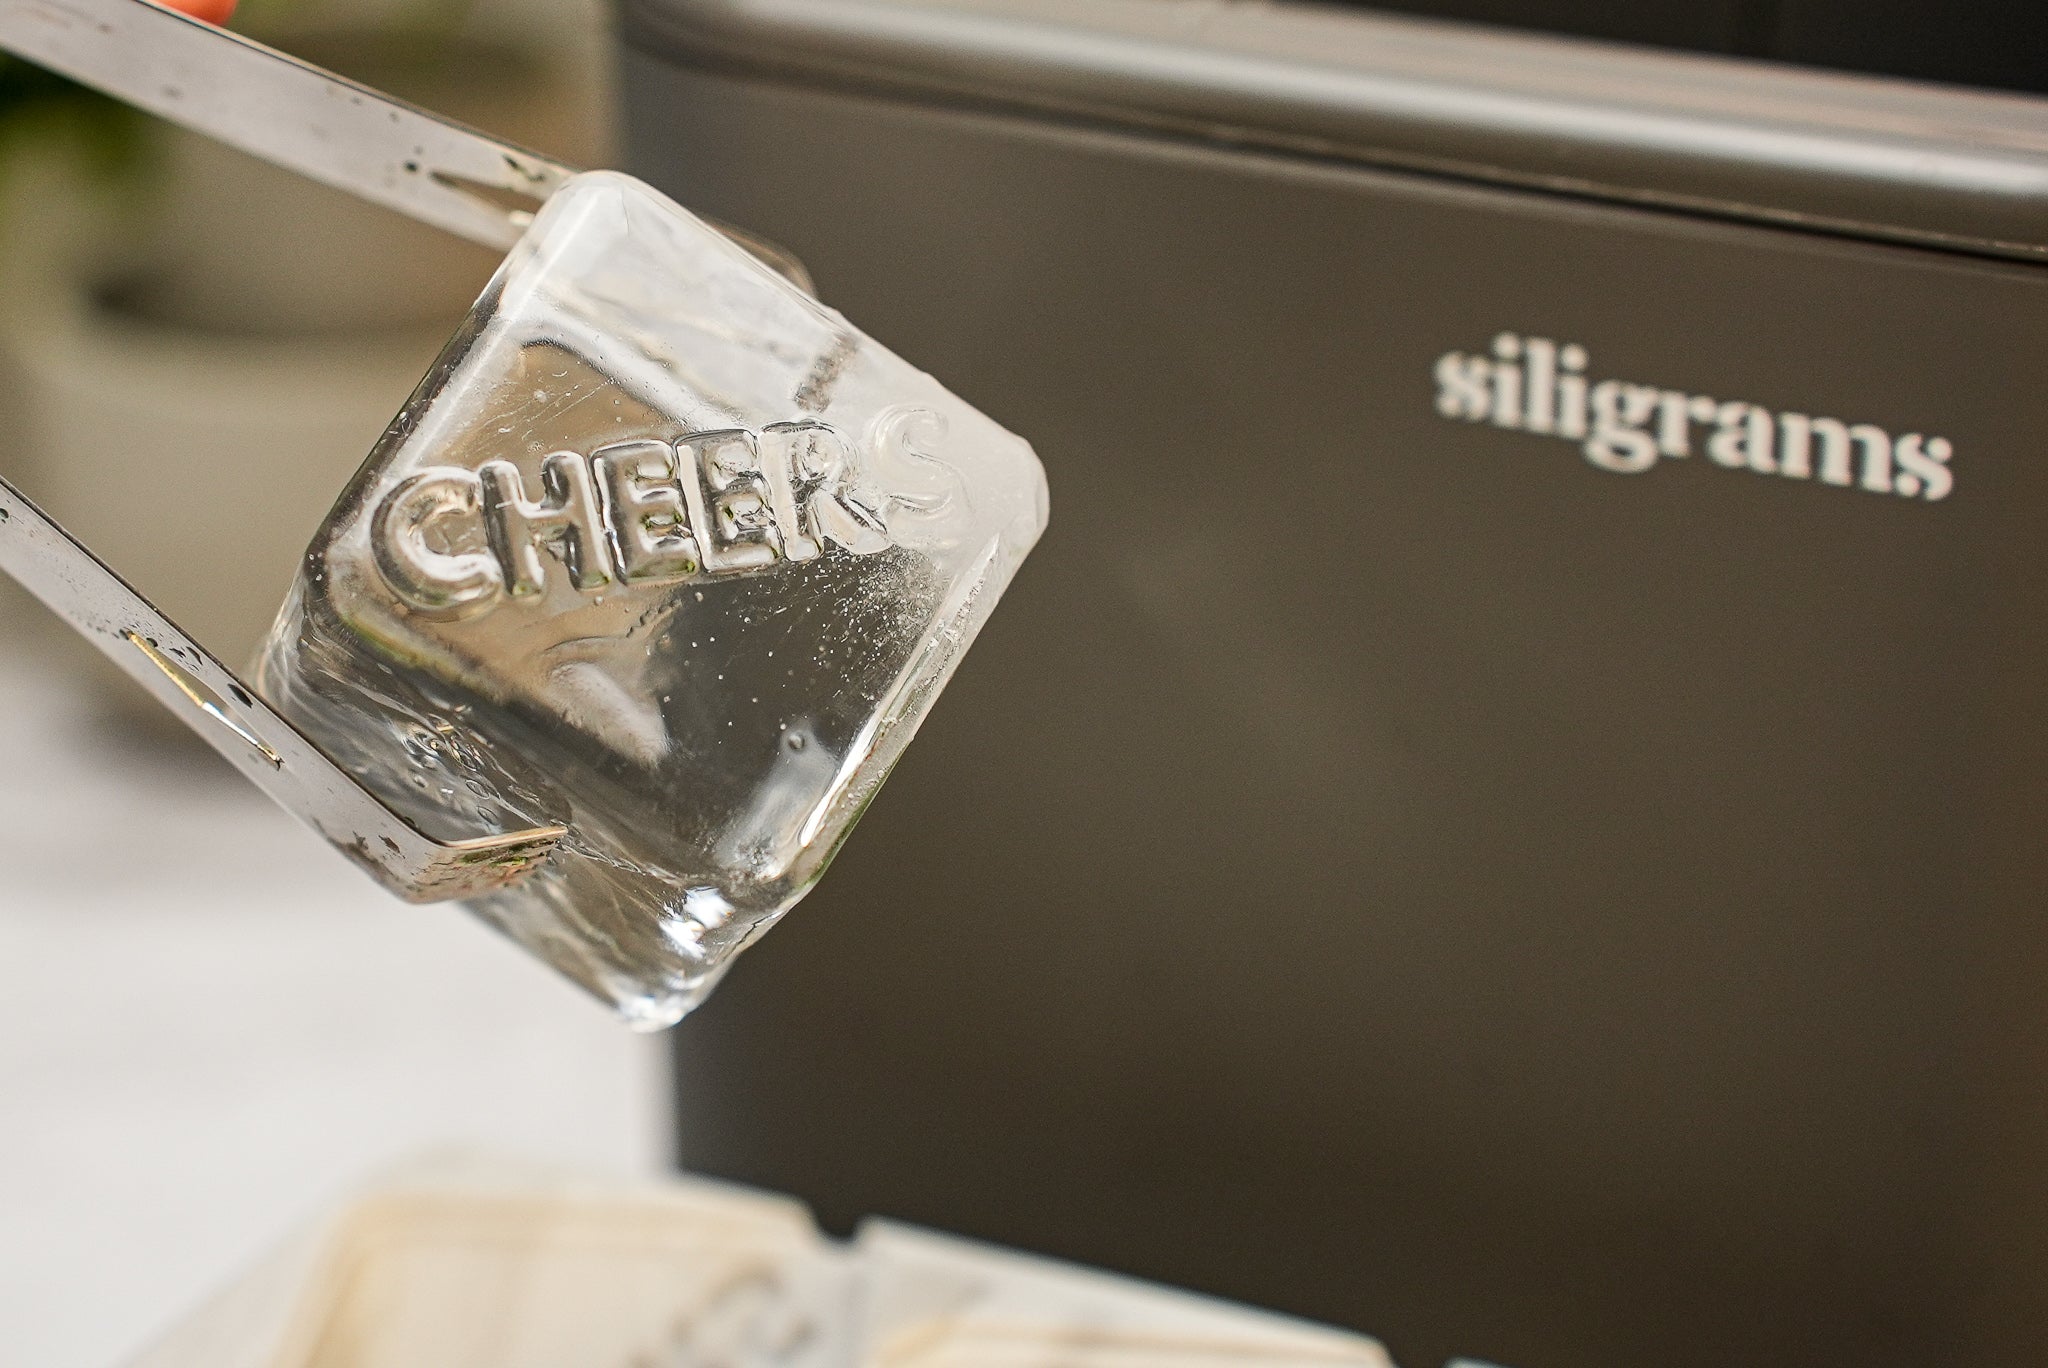 We are loving our custom ice cube trays with the #Siligrams logo